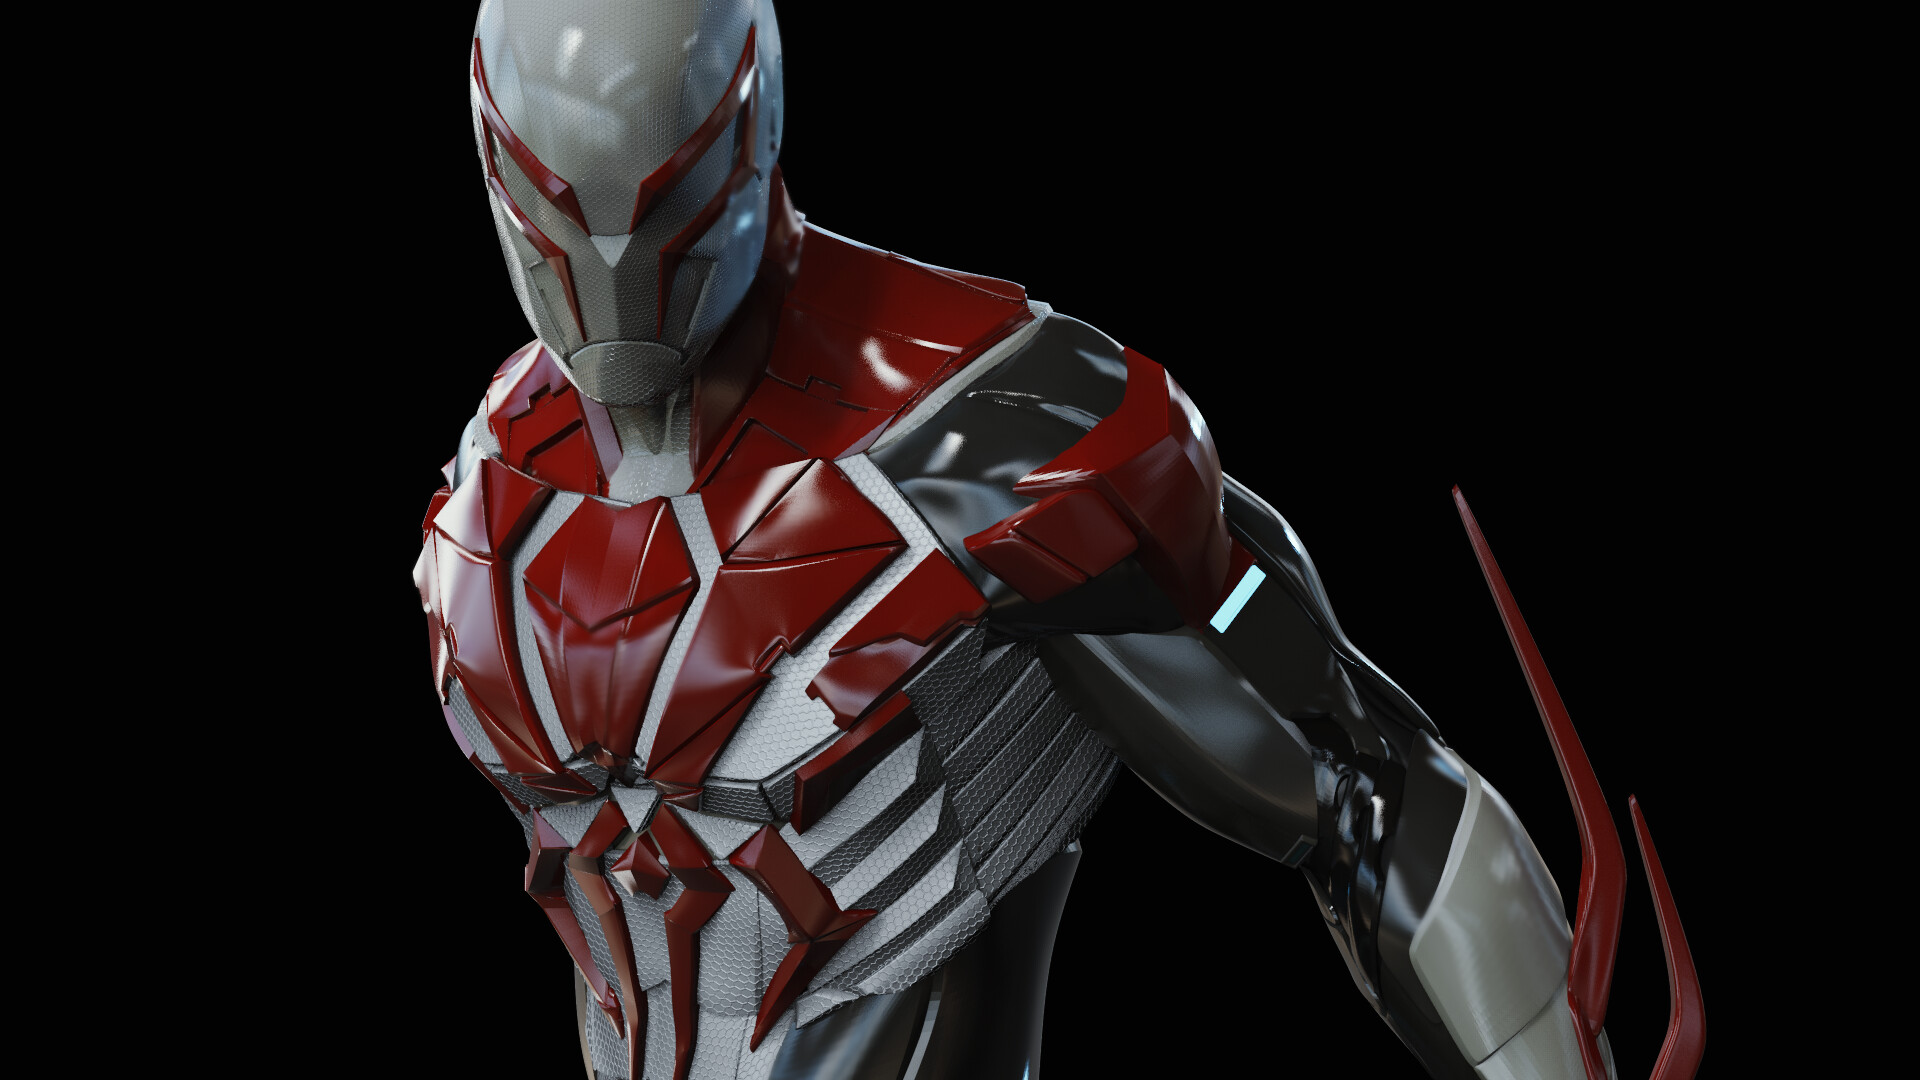 This is my fanart of Spiderman 2099